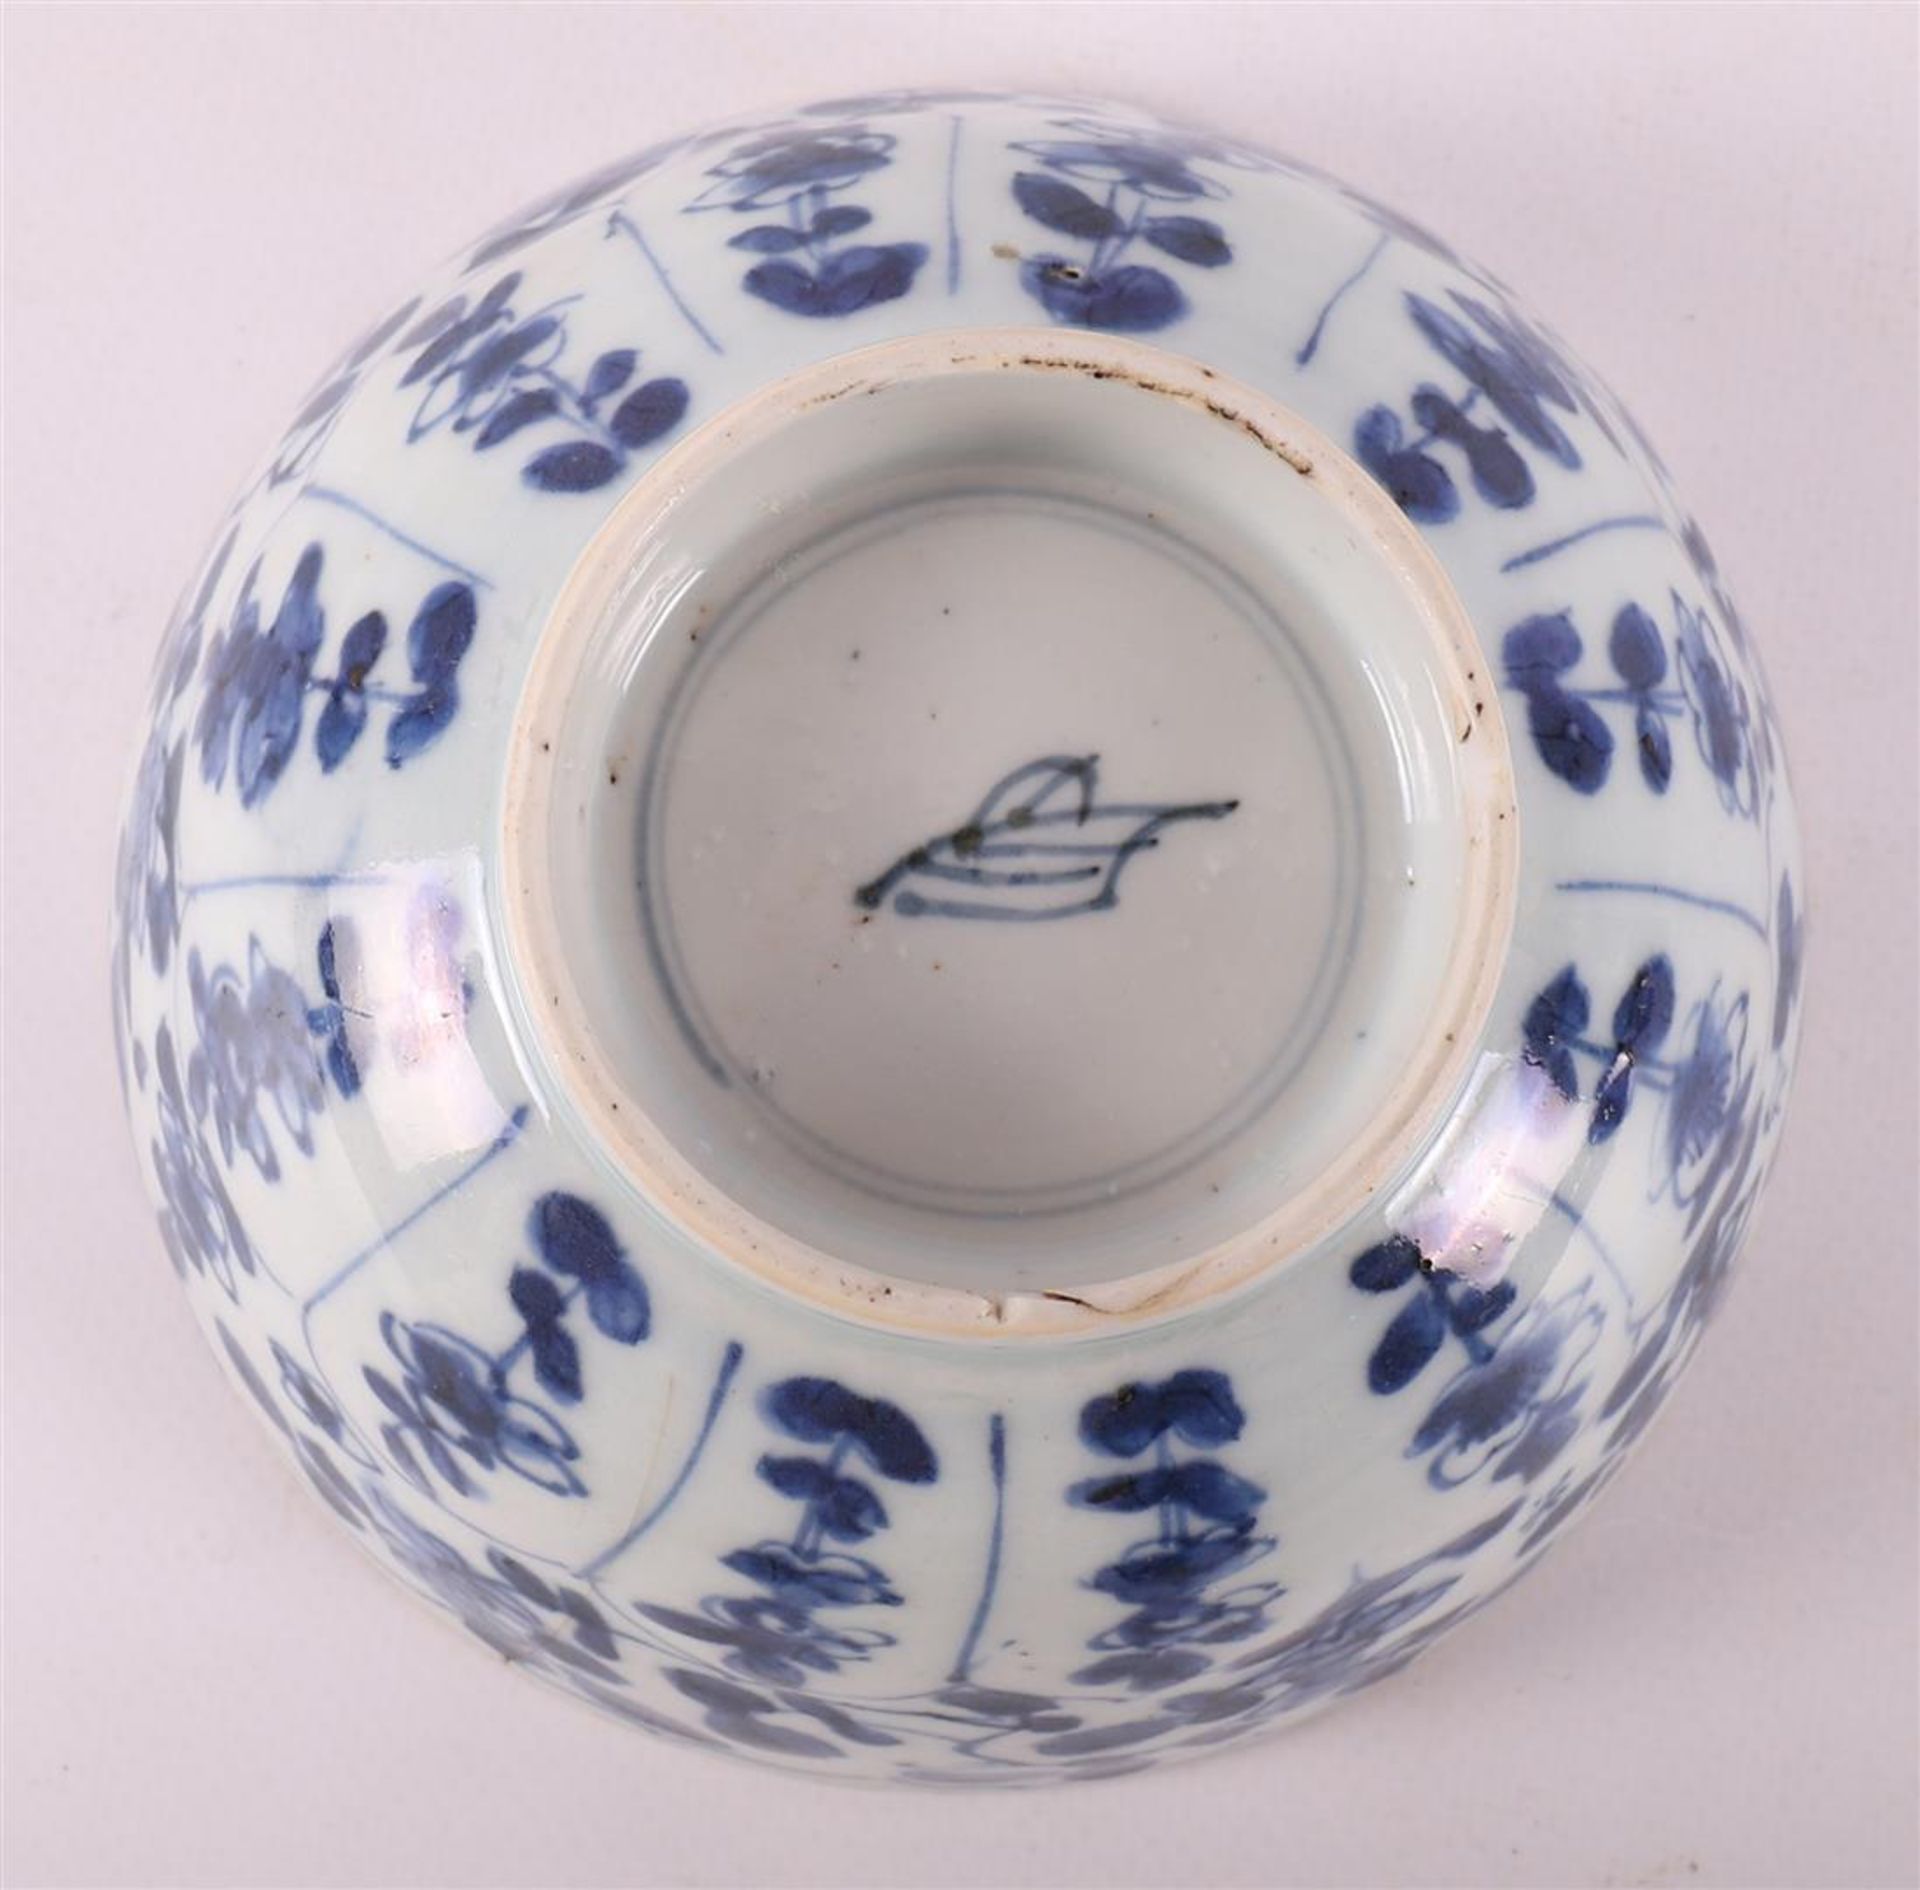 Two various blue/white porcelain bowls and curb ring, China, Kangxi, around 1700 - Image 8 of 8